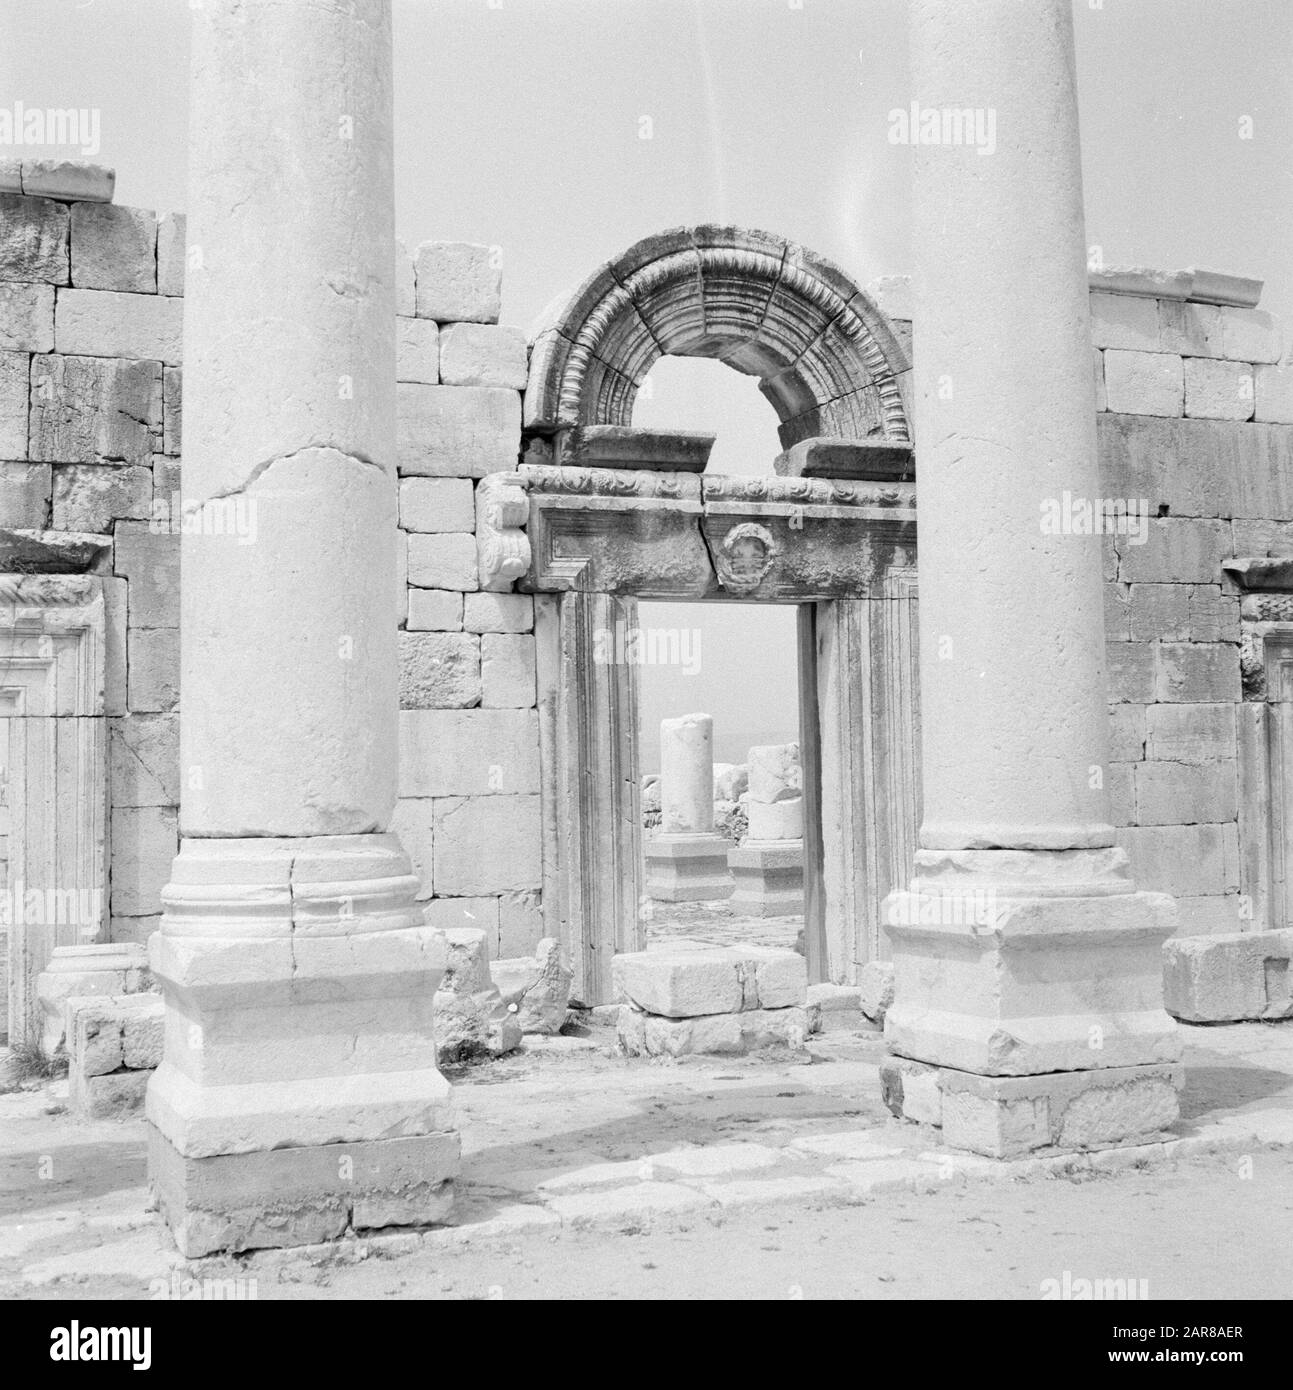 Israel 1964-1965: Bar'am, ruin synagogue  Ruins of the ancient synagogue in Kfar Bar'am Annotation: Bar'am is a kibbutz in northern Israel, located about 300 meters from the border with Lebanon. Bar'am National Park is known for the remains of one of Israel's oldest synagogues Date: 1964 Location: Bar'am, Israel Keywords: archeology, sculptures, pillars, ruins, synagogues Stock Photo